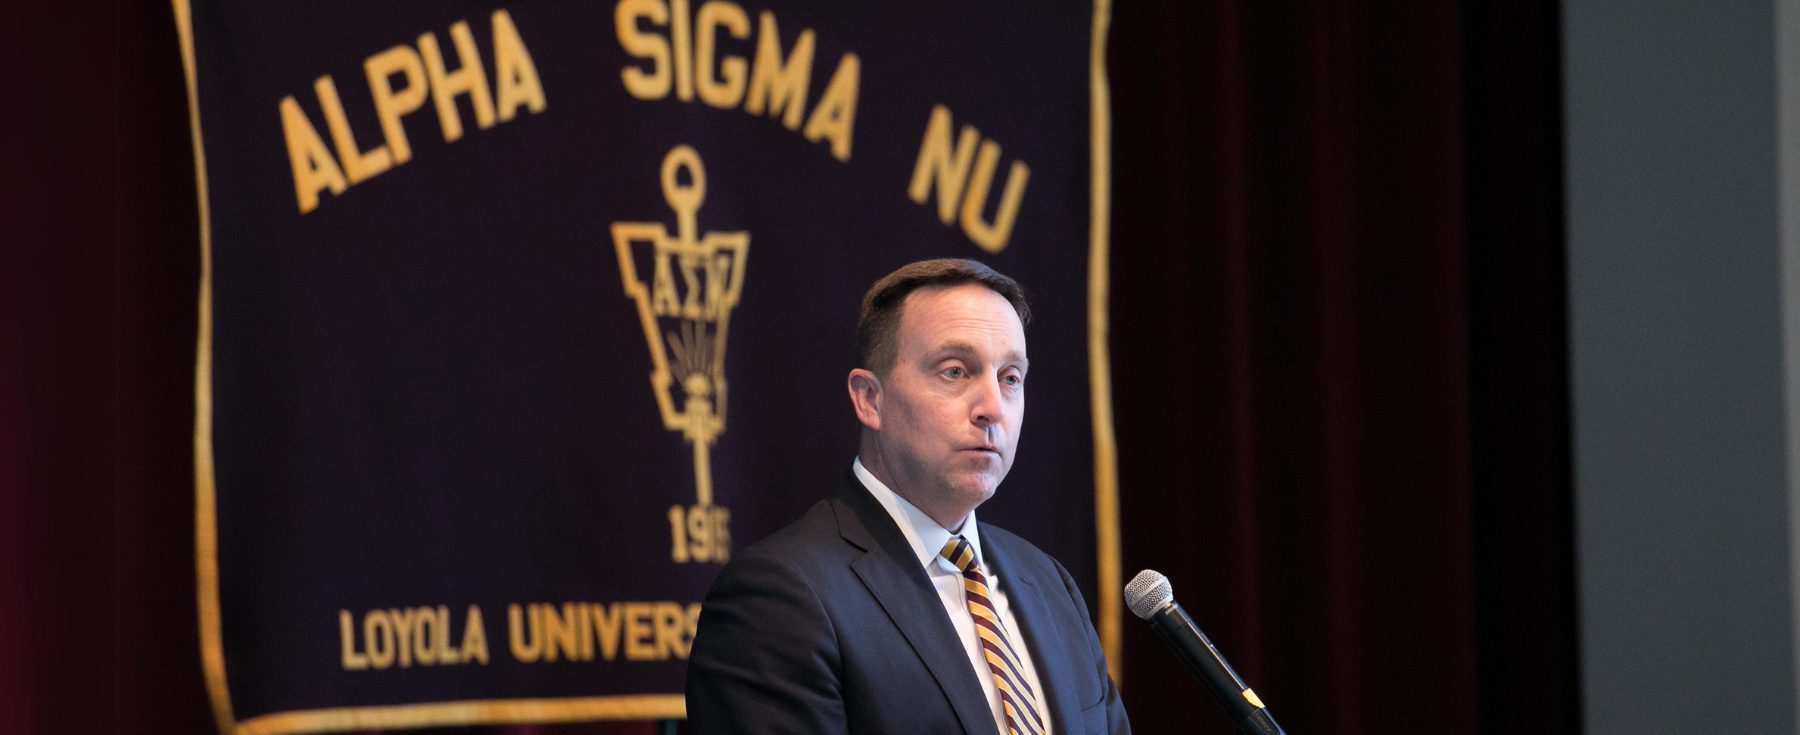 President Mark Reed speaks to inductees of the Alpha Sigma Nu Honor Society.